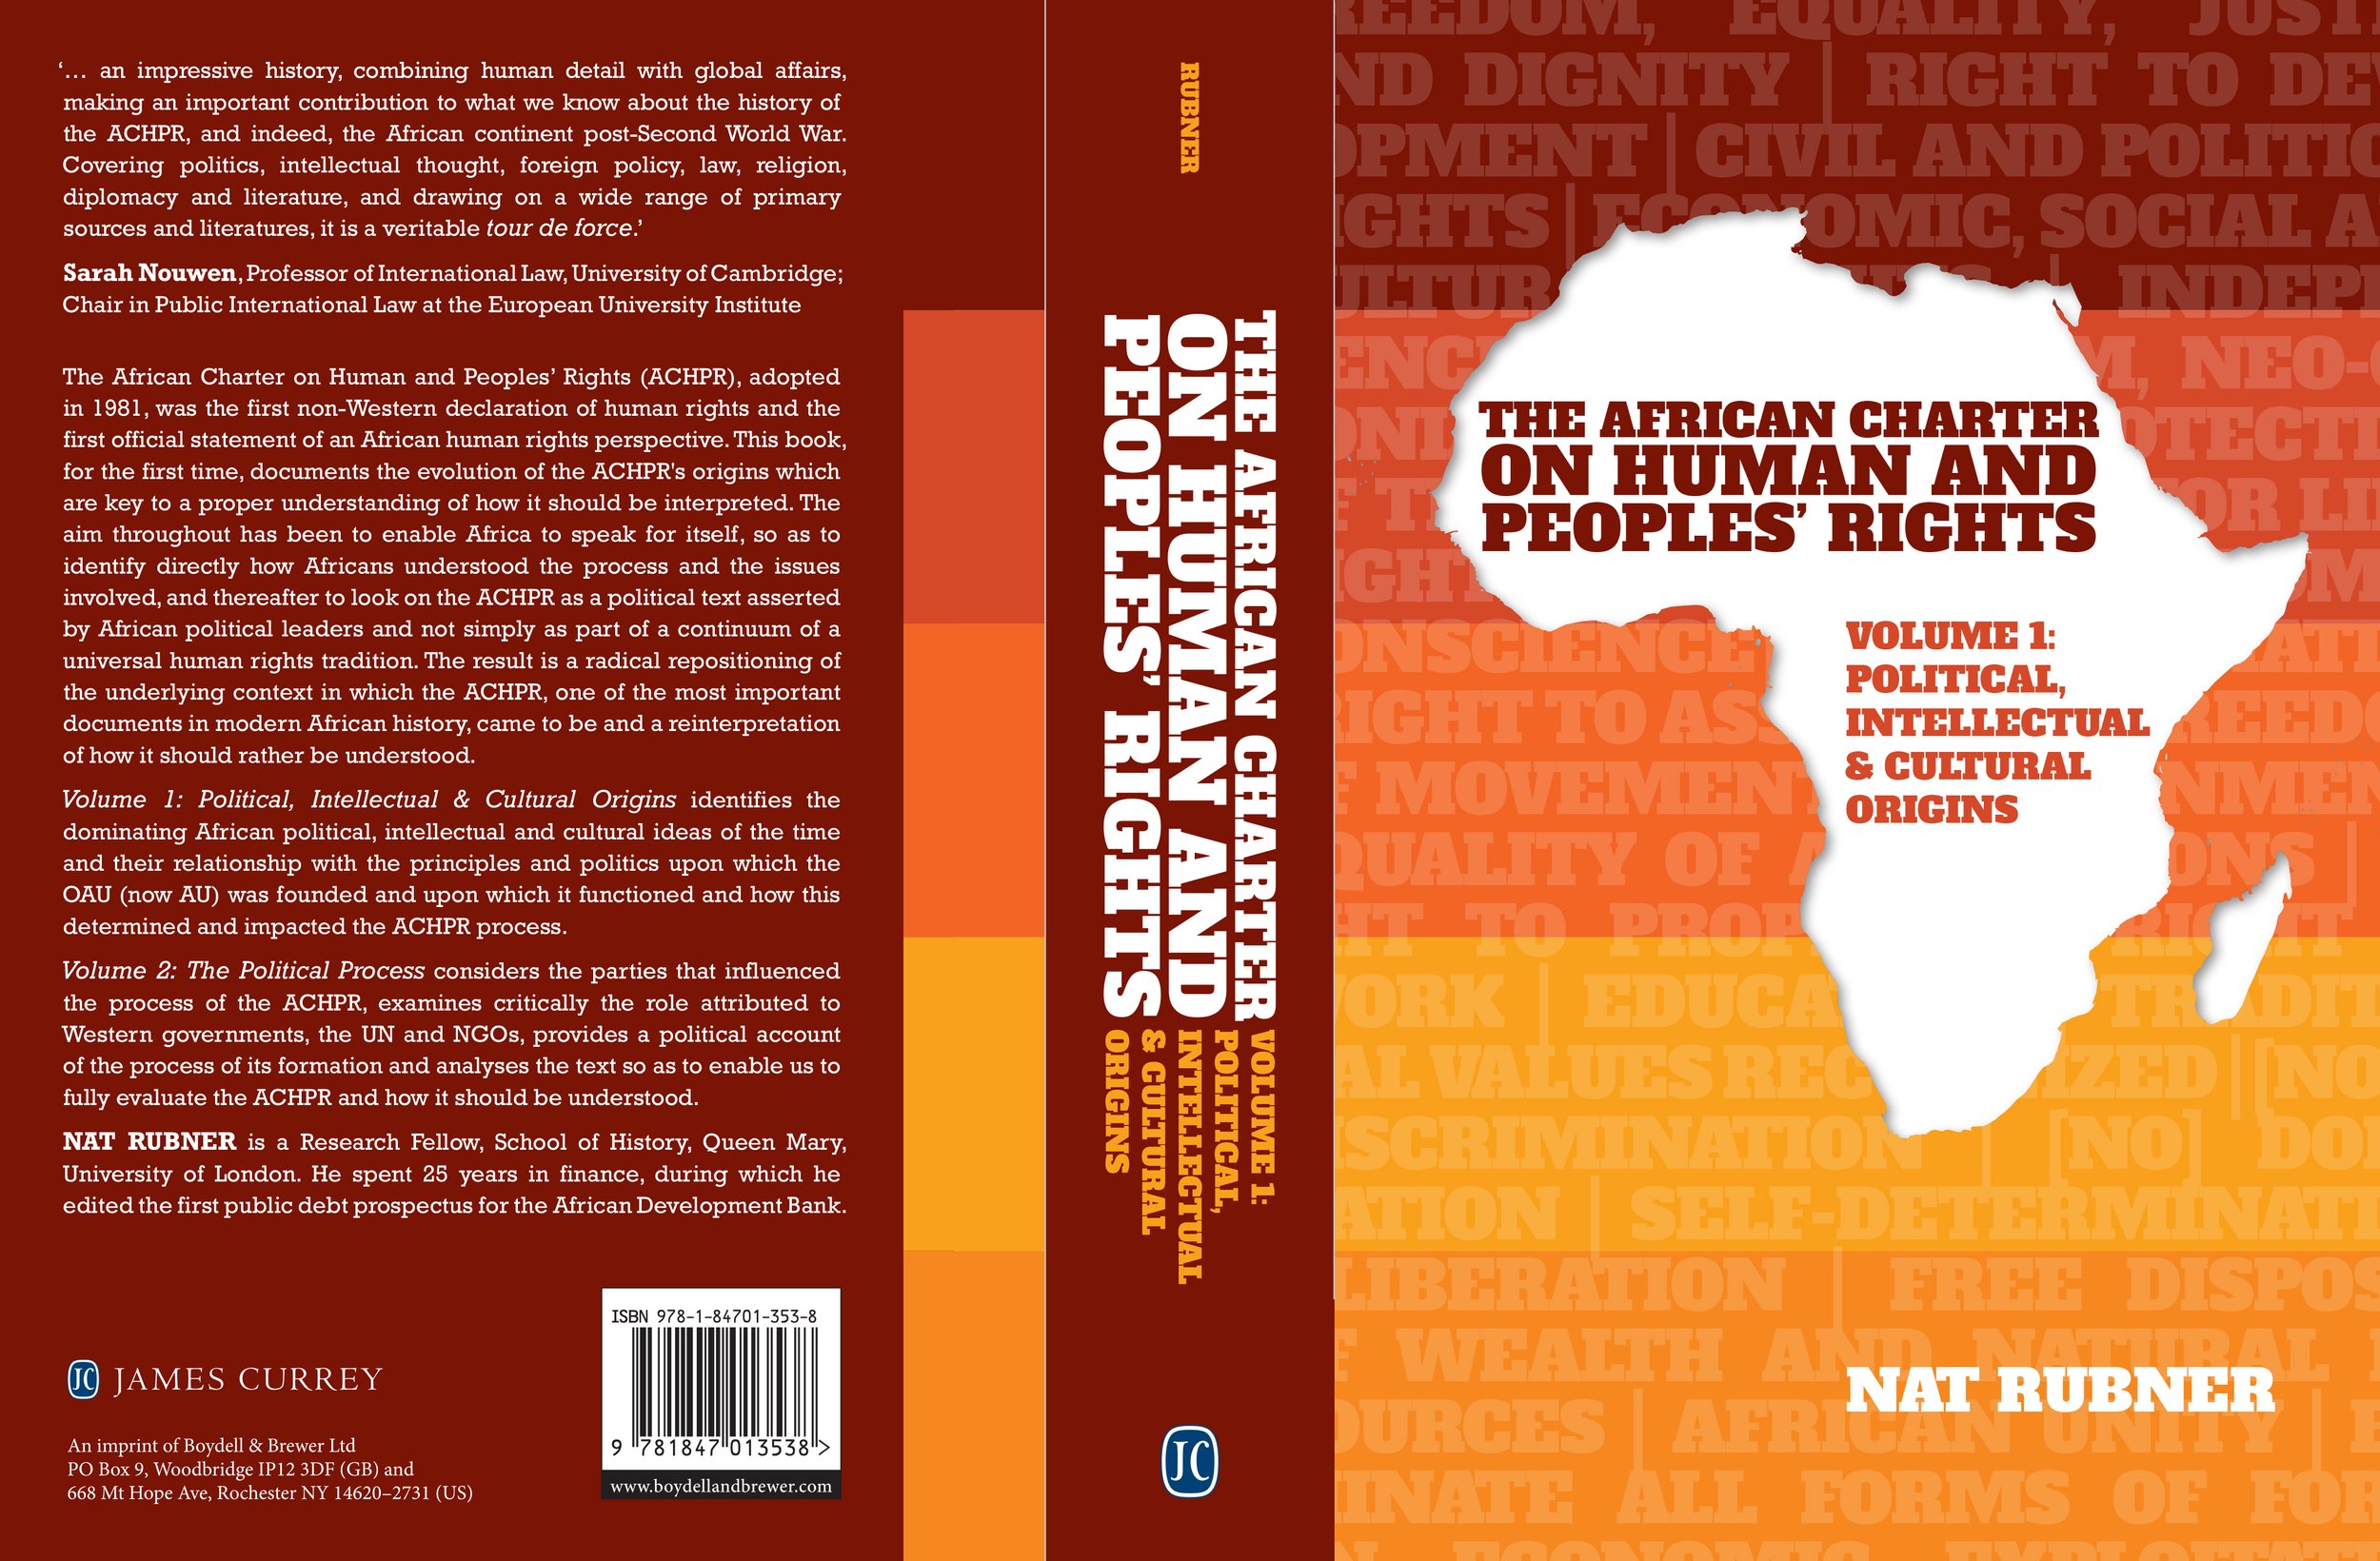 The African Charter on Human and Peoples’ Rights (Volume 1)